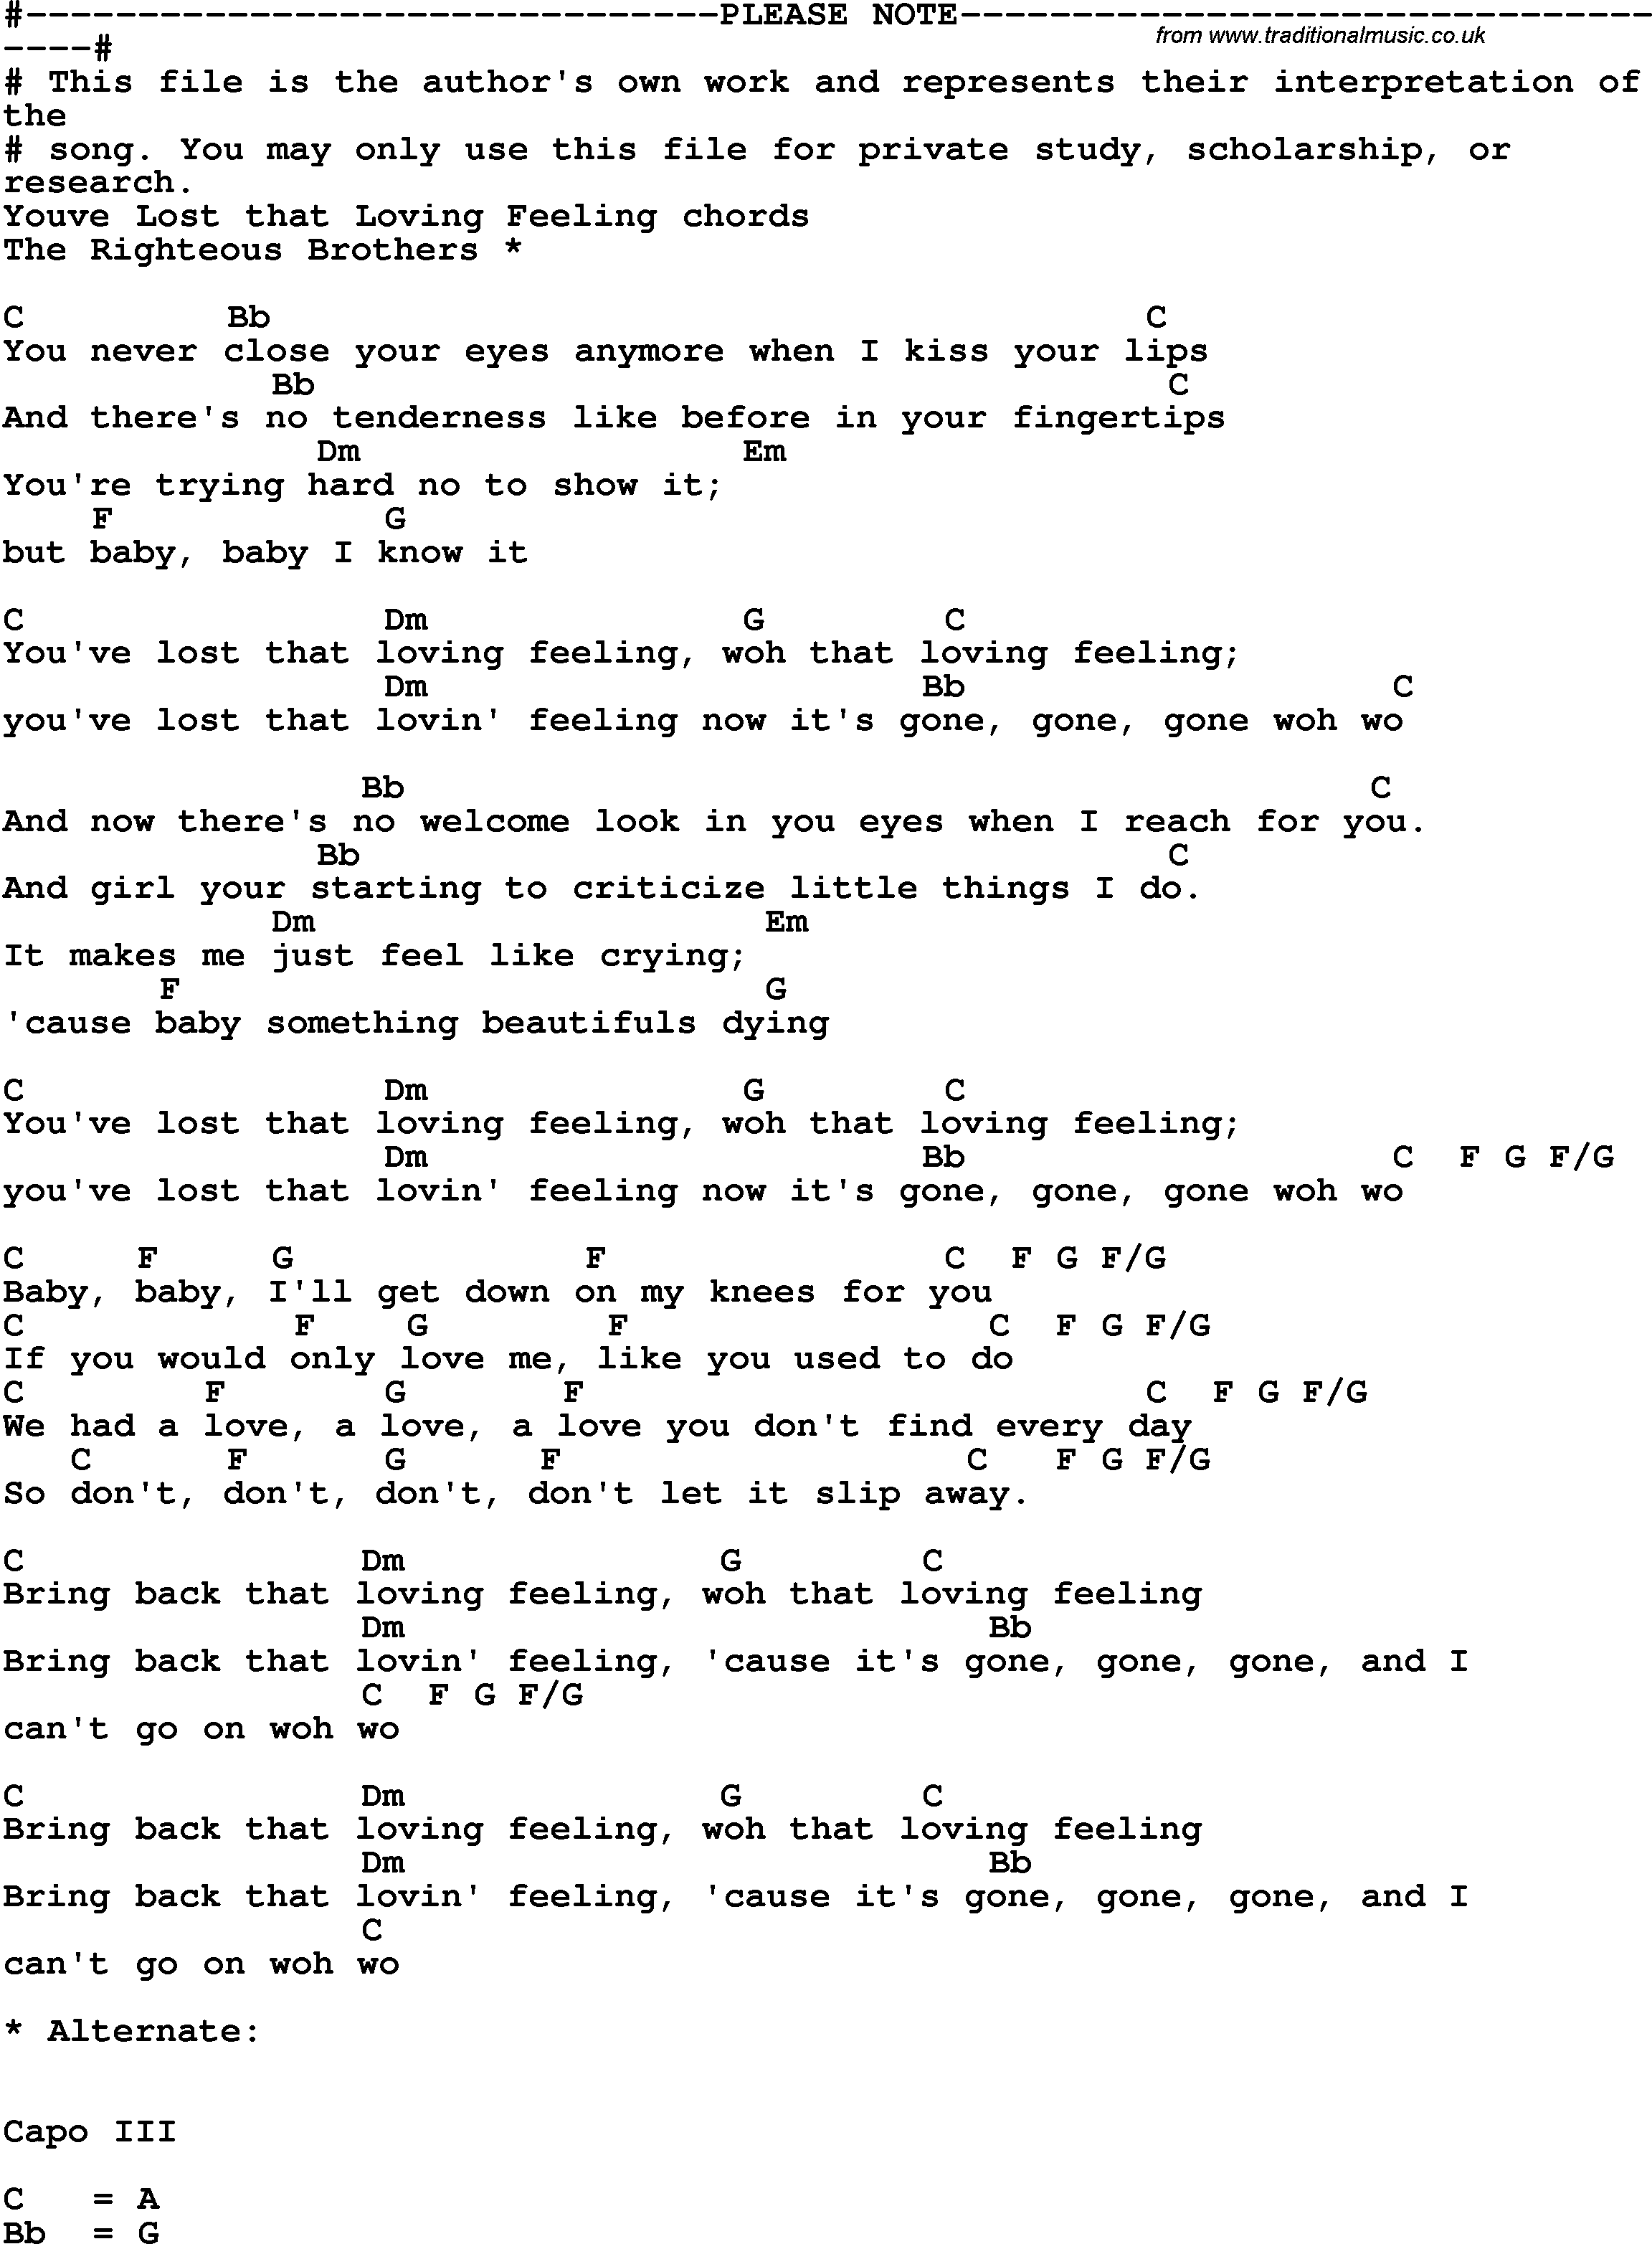 Song Lyrics with guitar chords for You've Lost That Loving Feeling